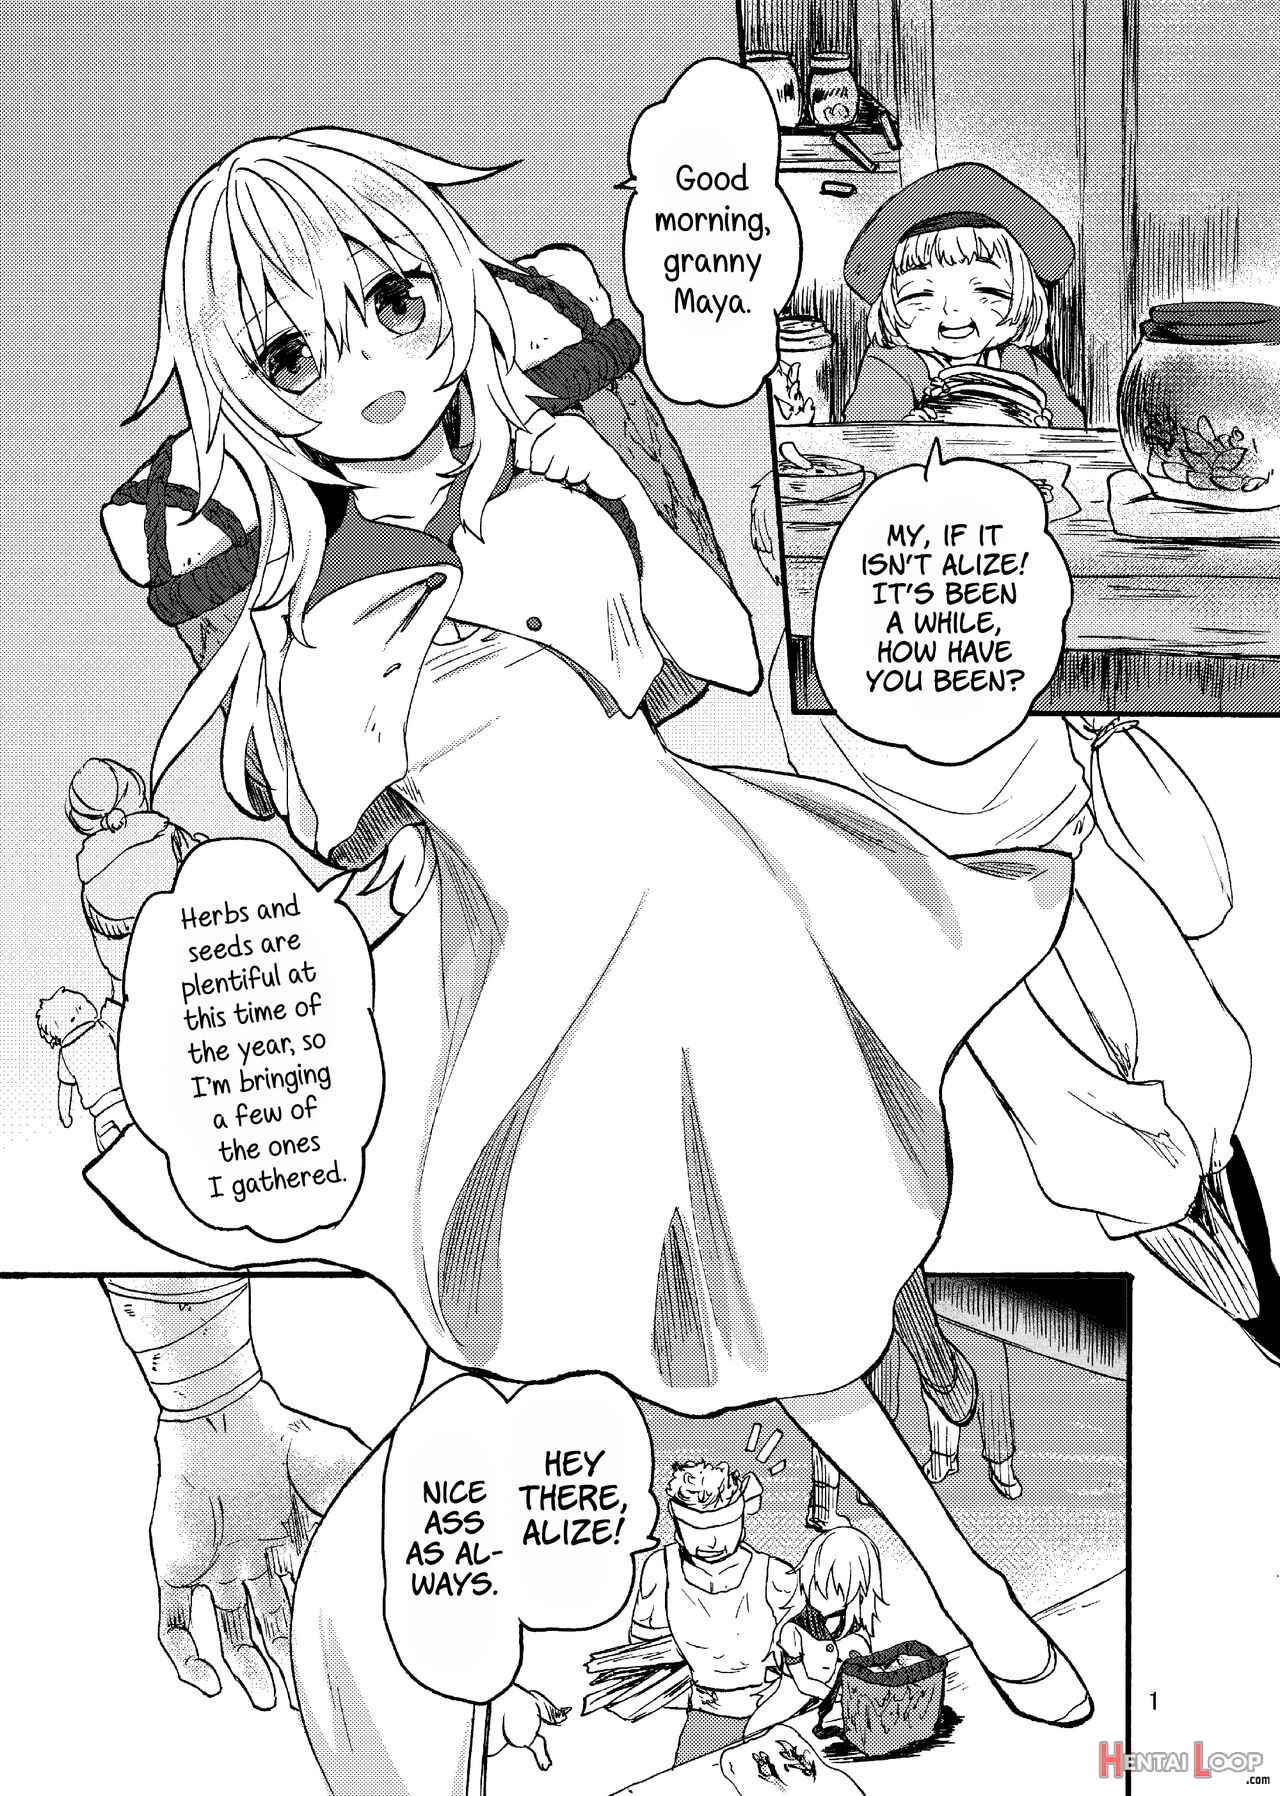 Ryuu X Musume ~alize~ After page 3